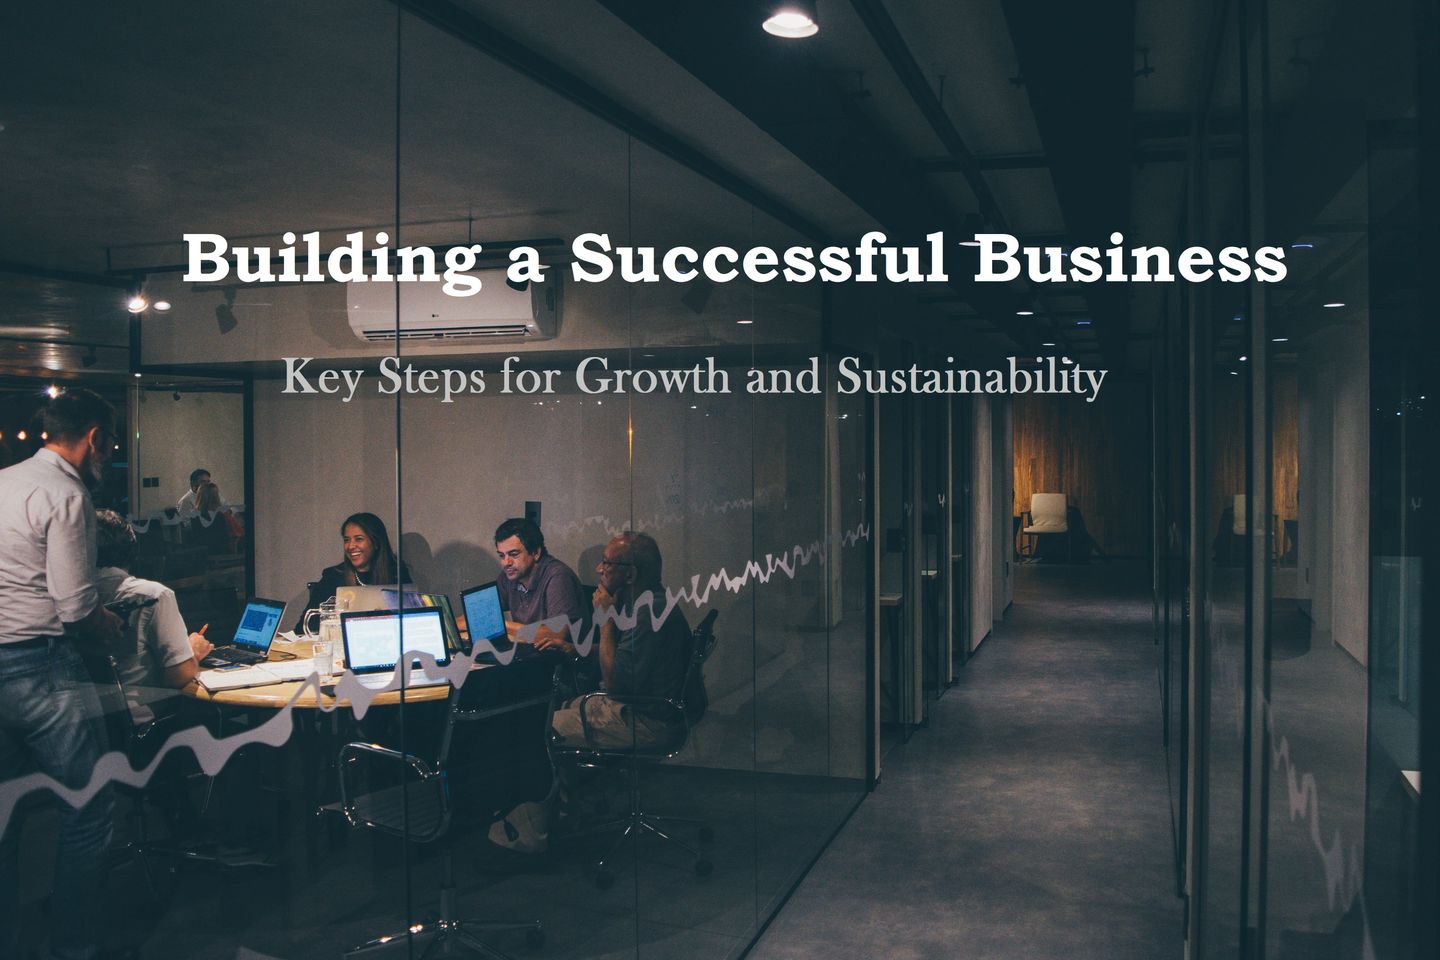 Building a Successful Business: Key Steps for Growth and Sustainability